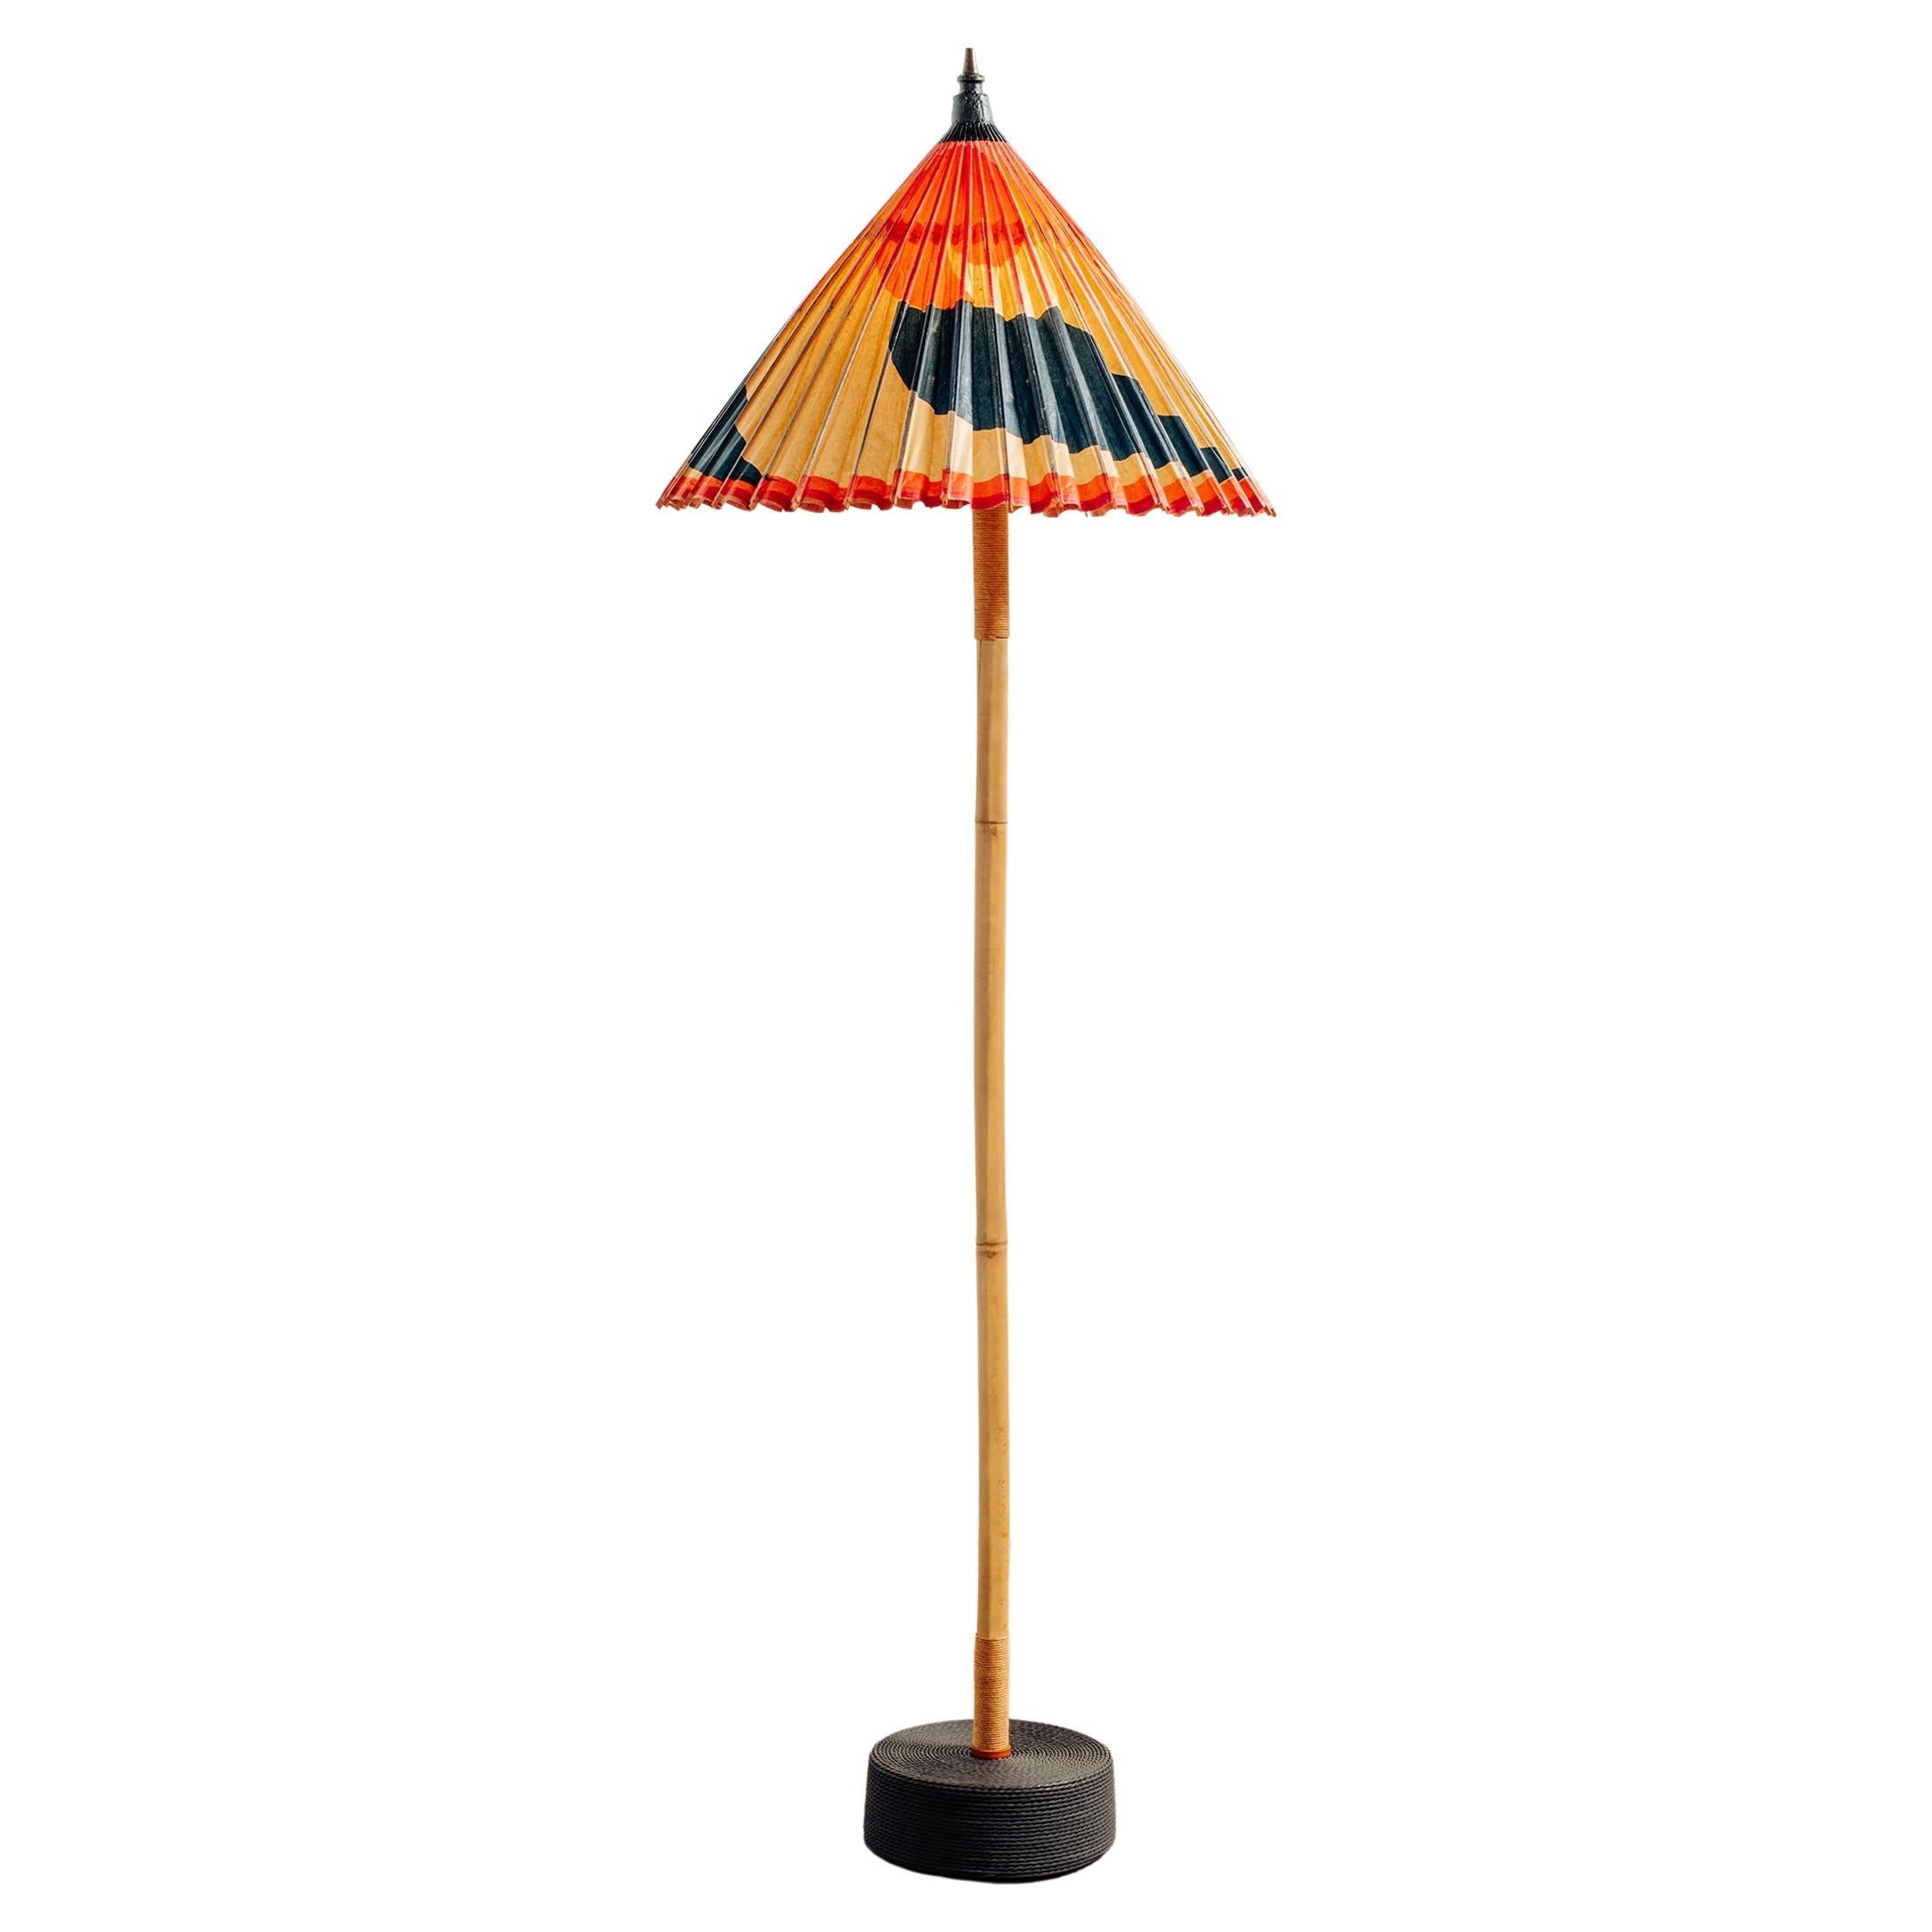 'World’s Fair' Bamboo Floor Lamp with Parasol Shade by Christopher Tennant